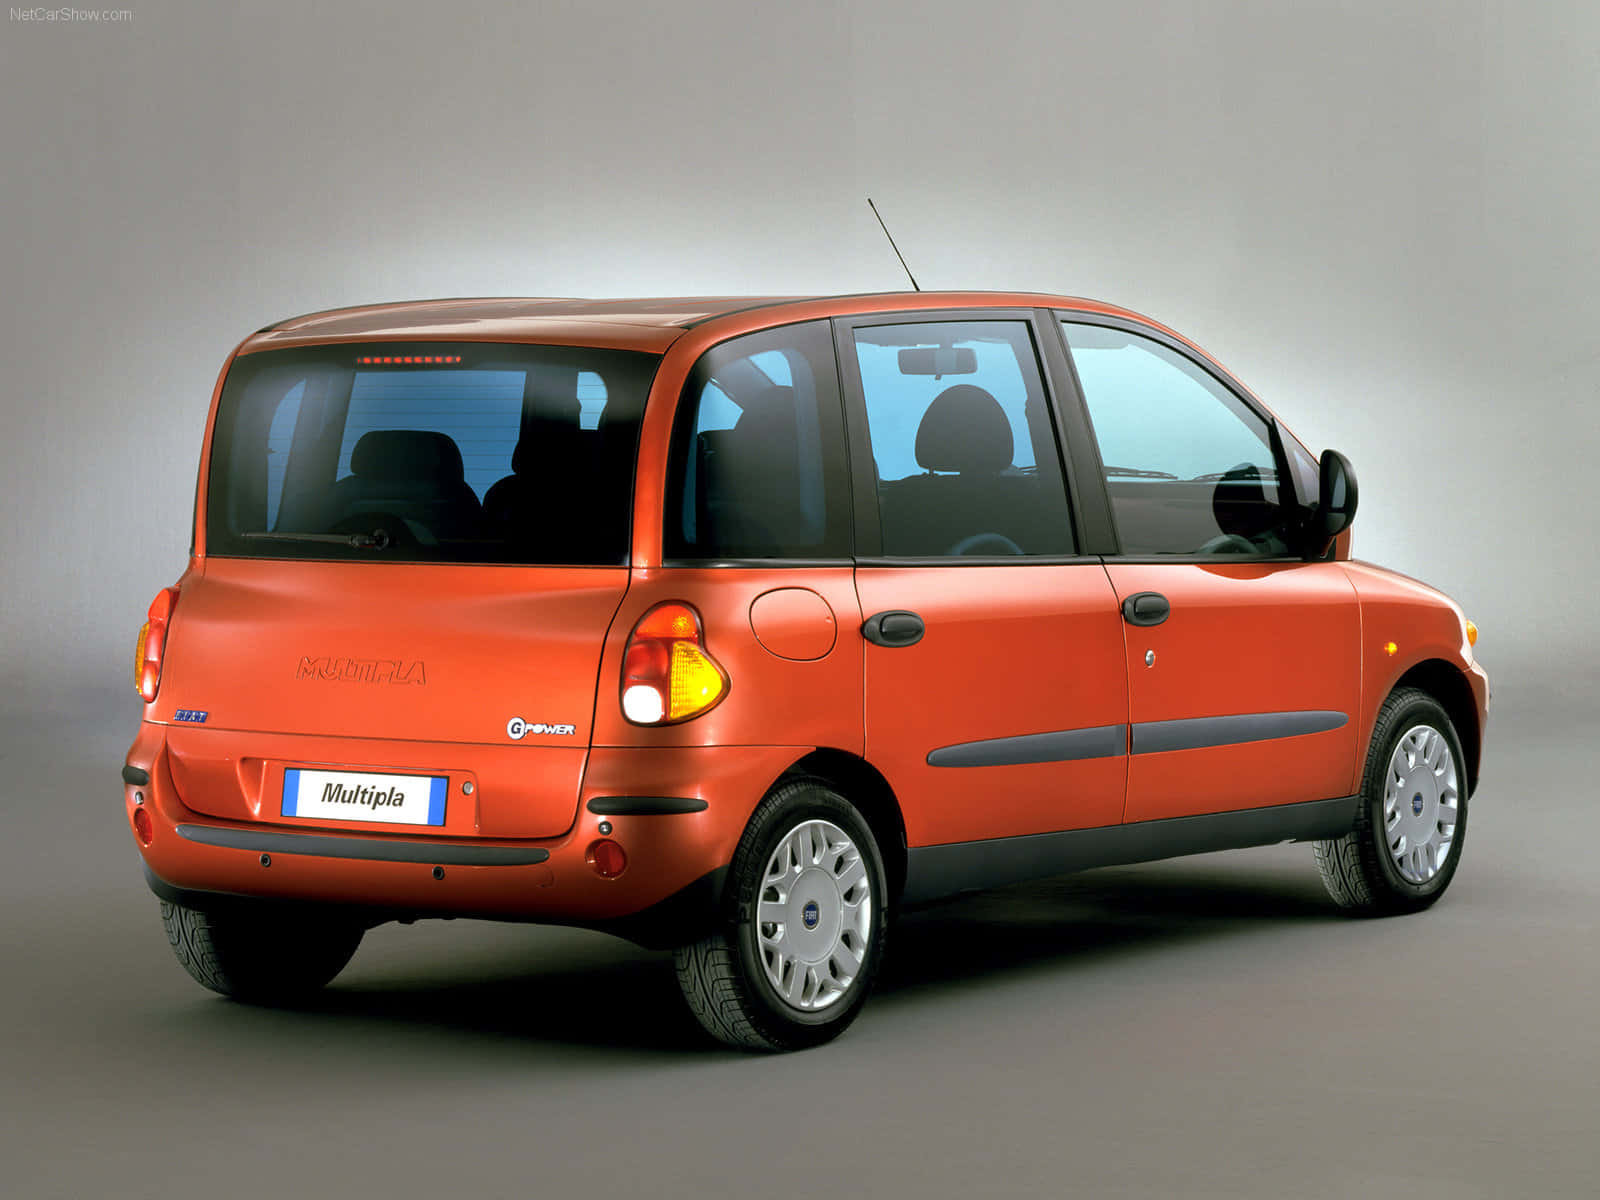 Caption: Classic Fiat Multipla In All Its Glory Wallpaper